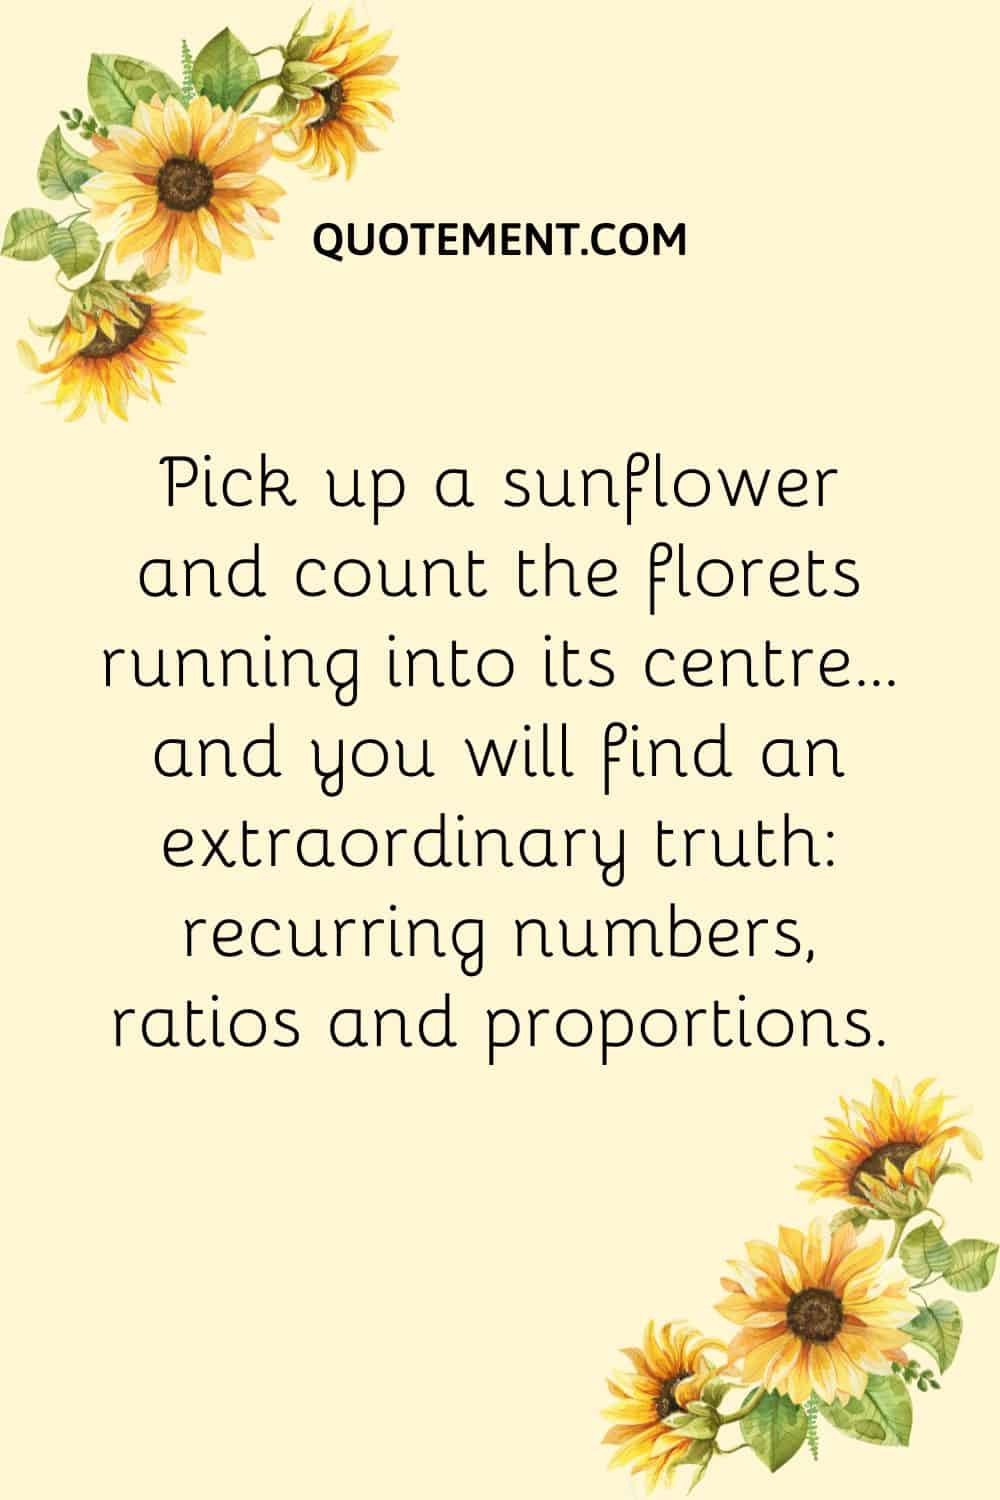 Pick up a sunflower and count the florets running into its centre